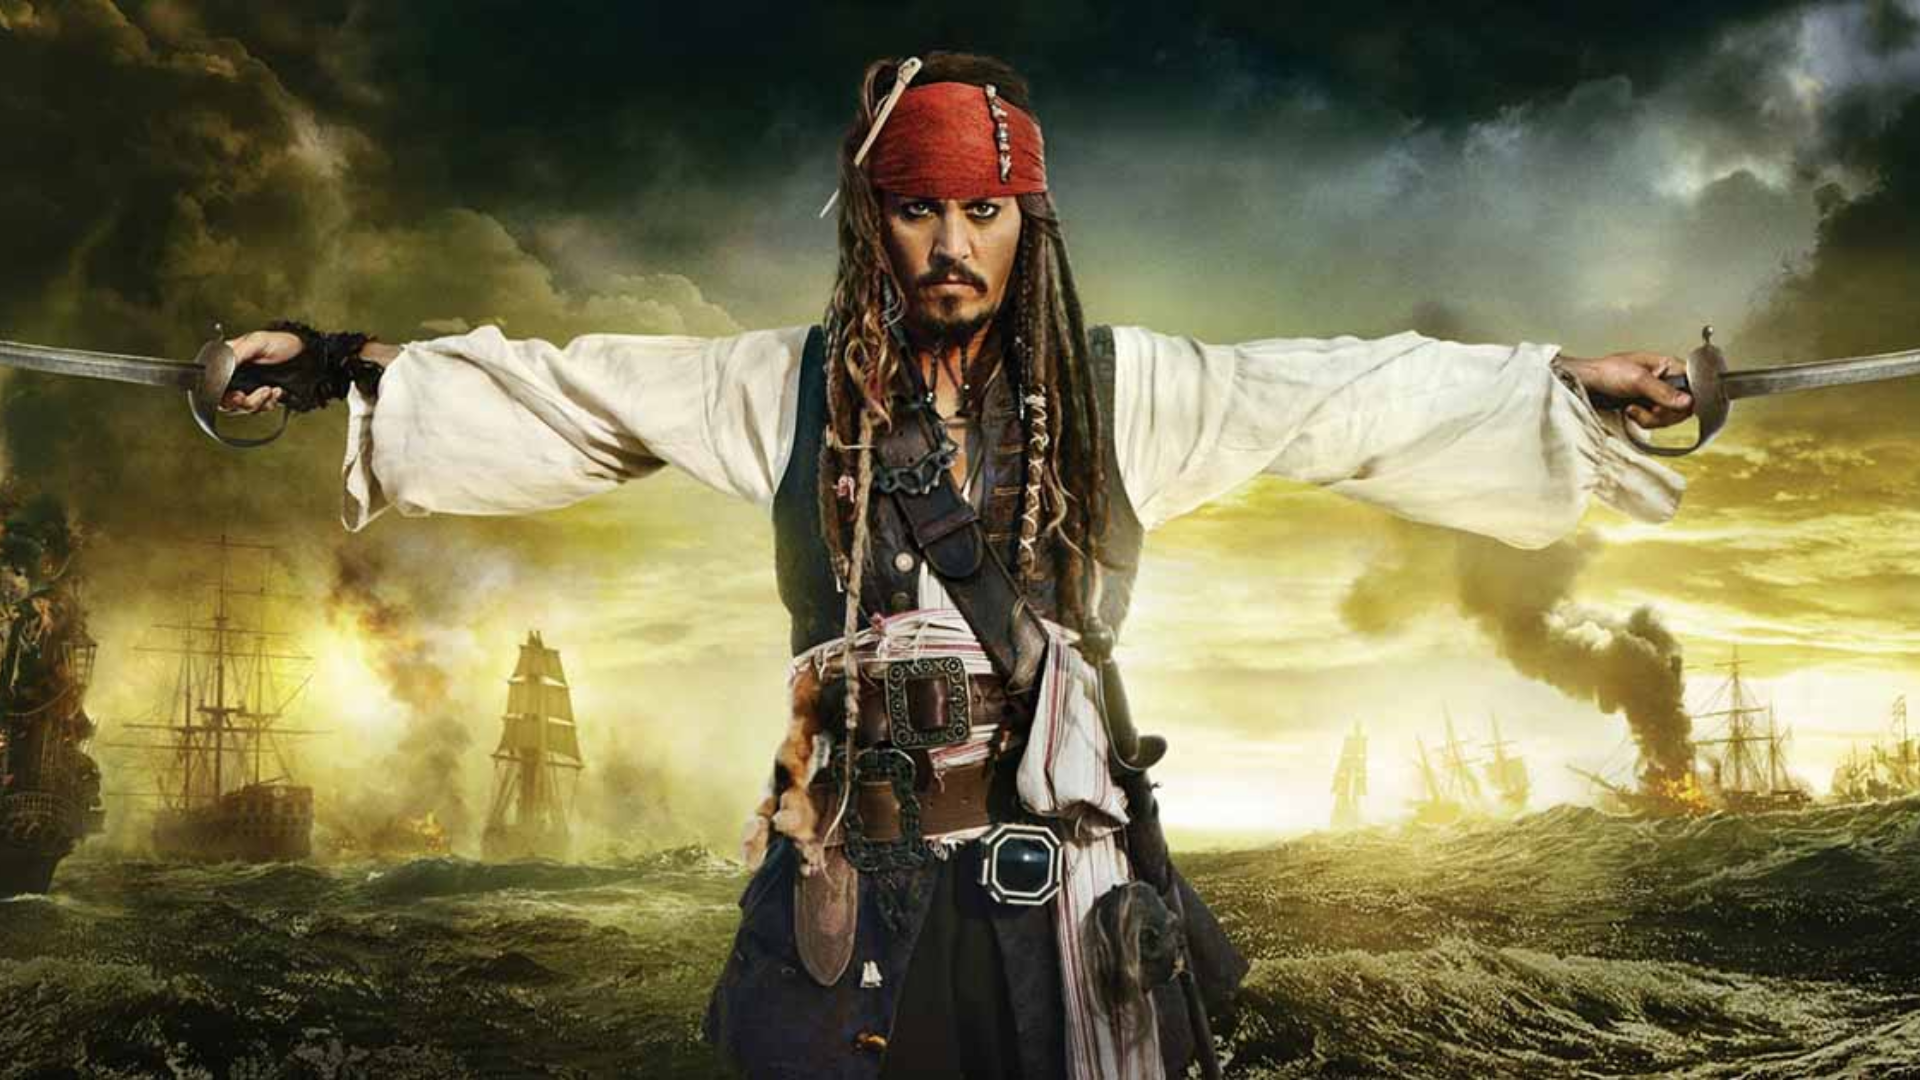 Is A ‘Pirates Of The Caribbean’ Reboot Officially In The Works?